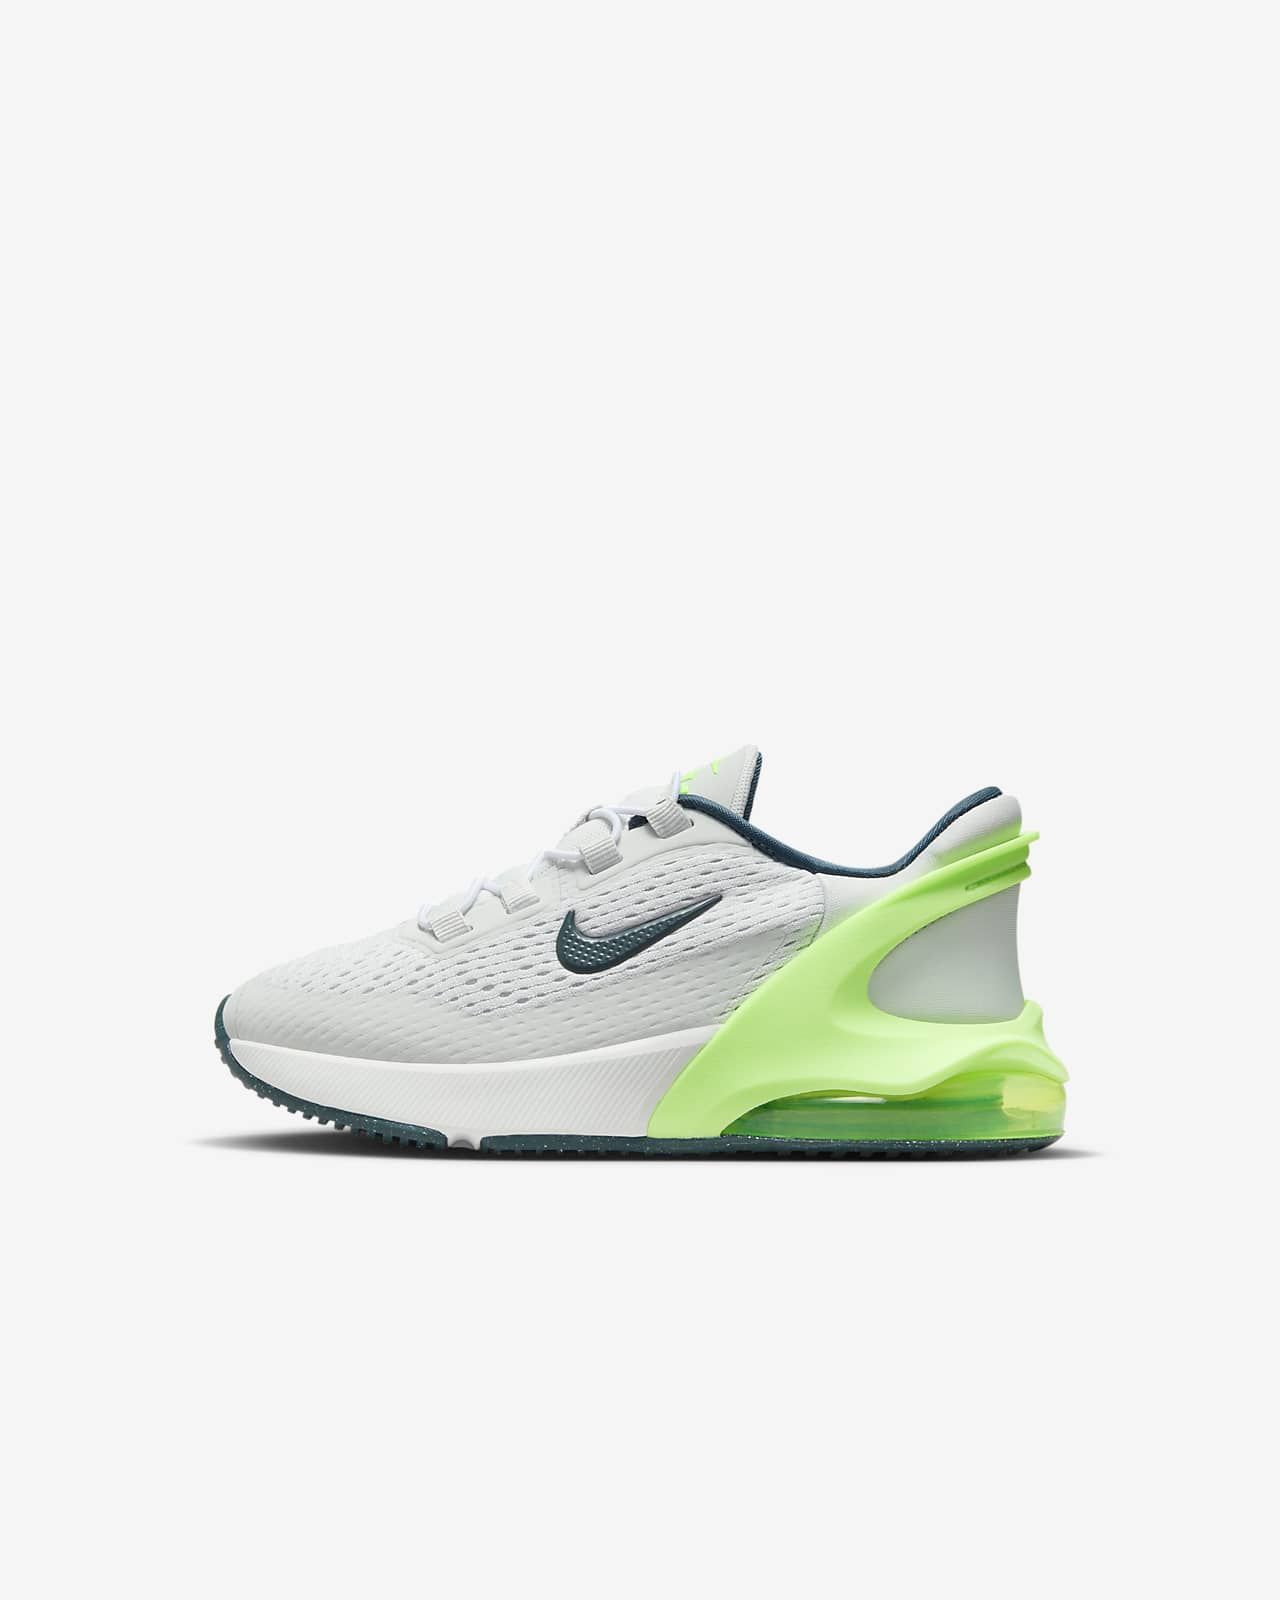 Nike Air Max 270 GO Little Kids' Easy On/Off Shoes. Nike.com | Nike (US)